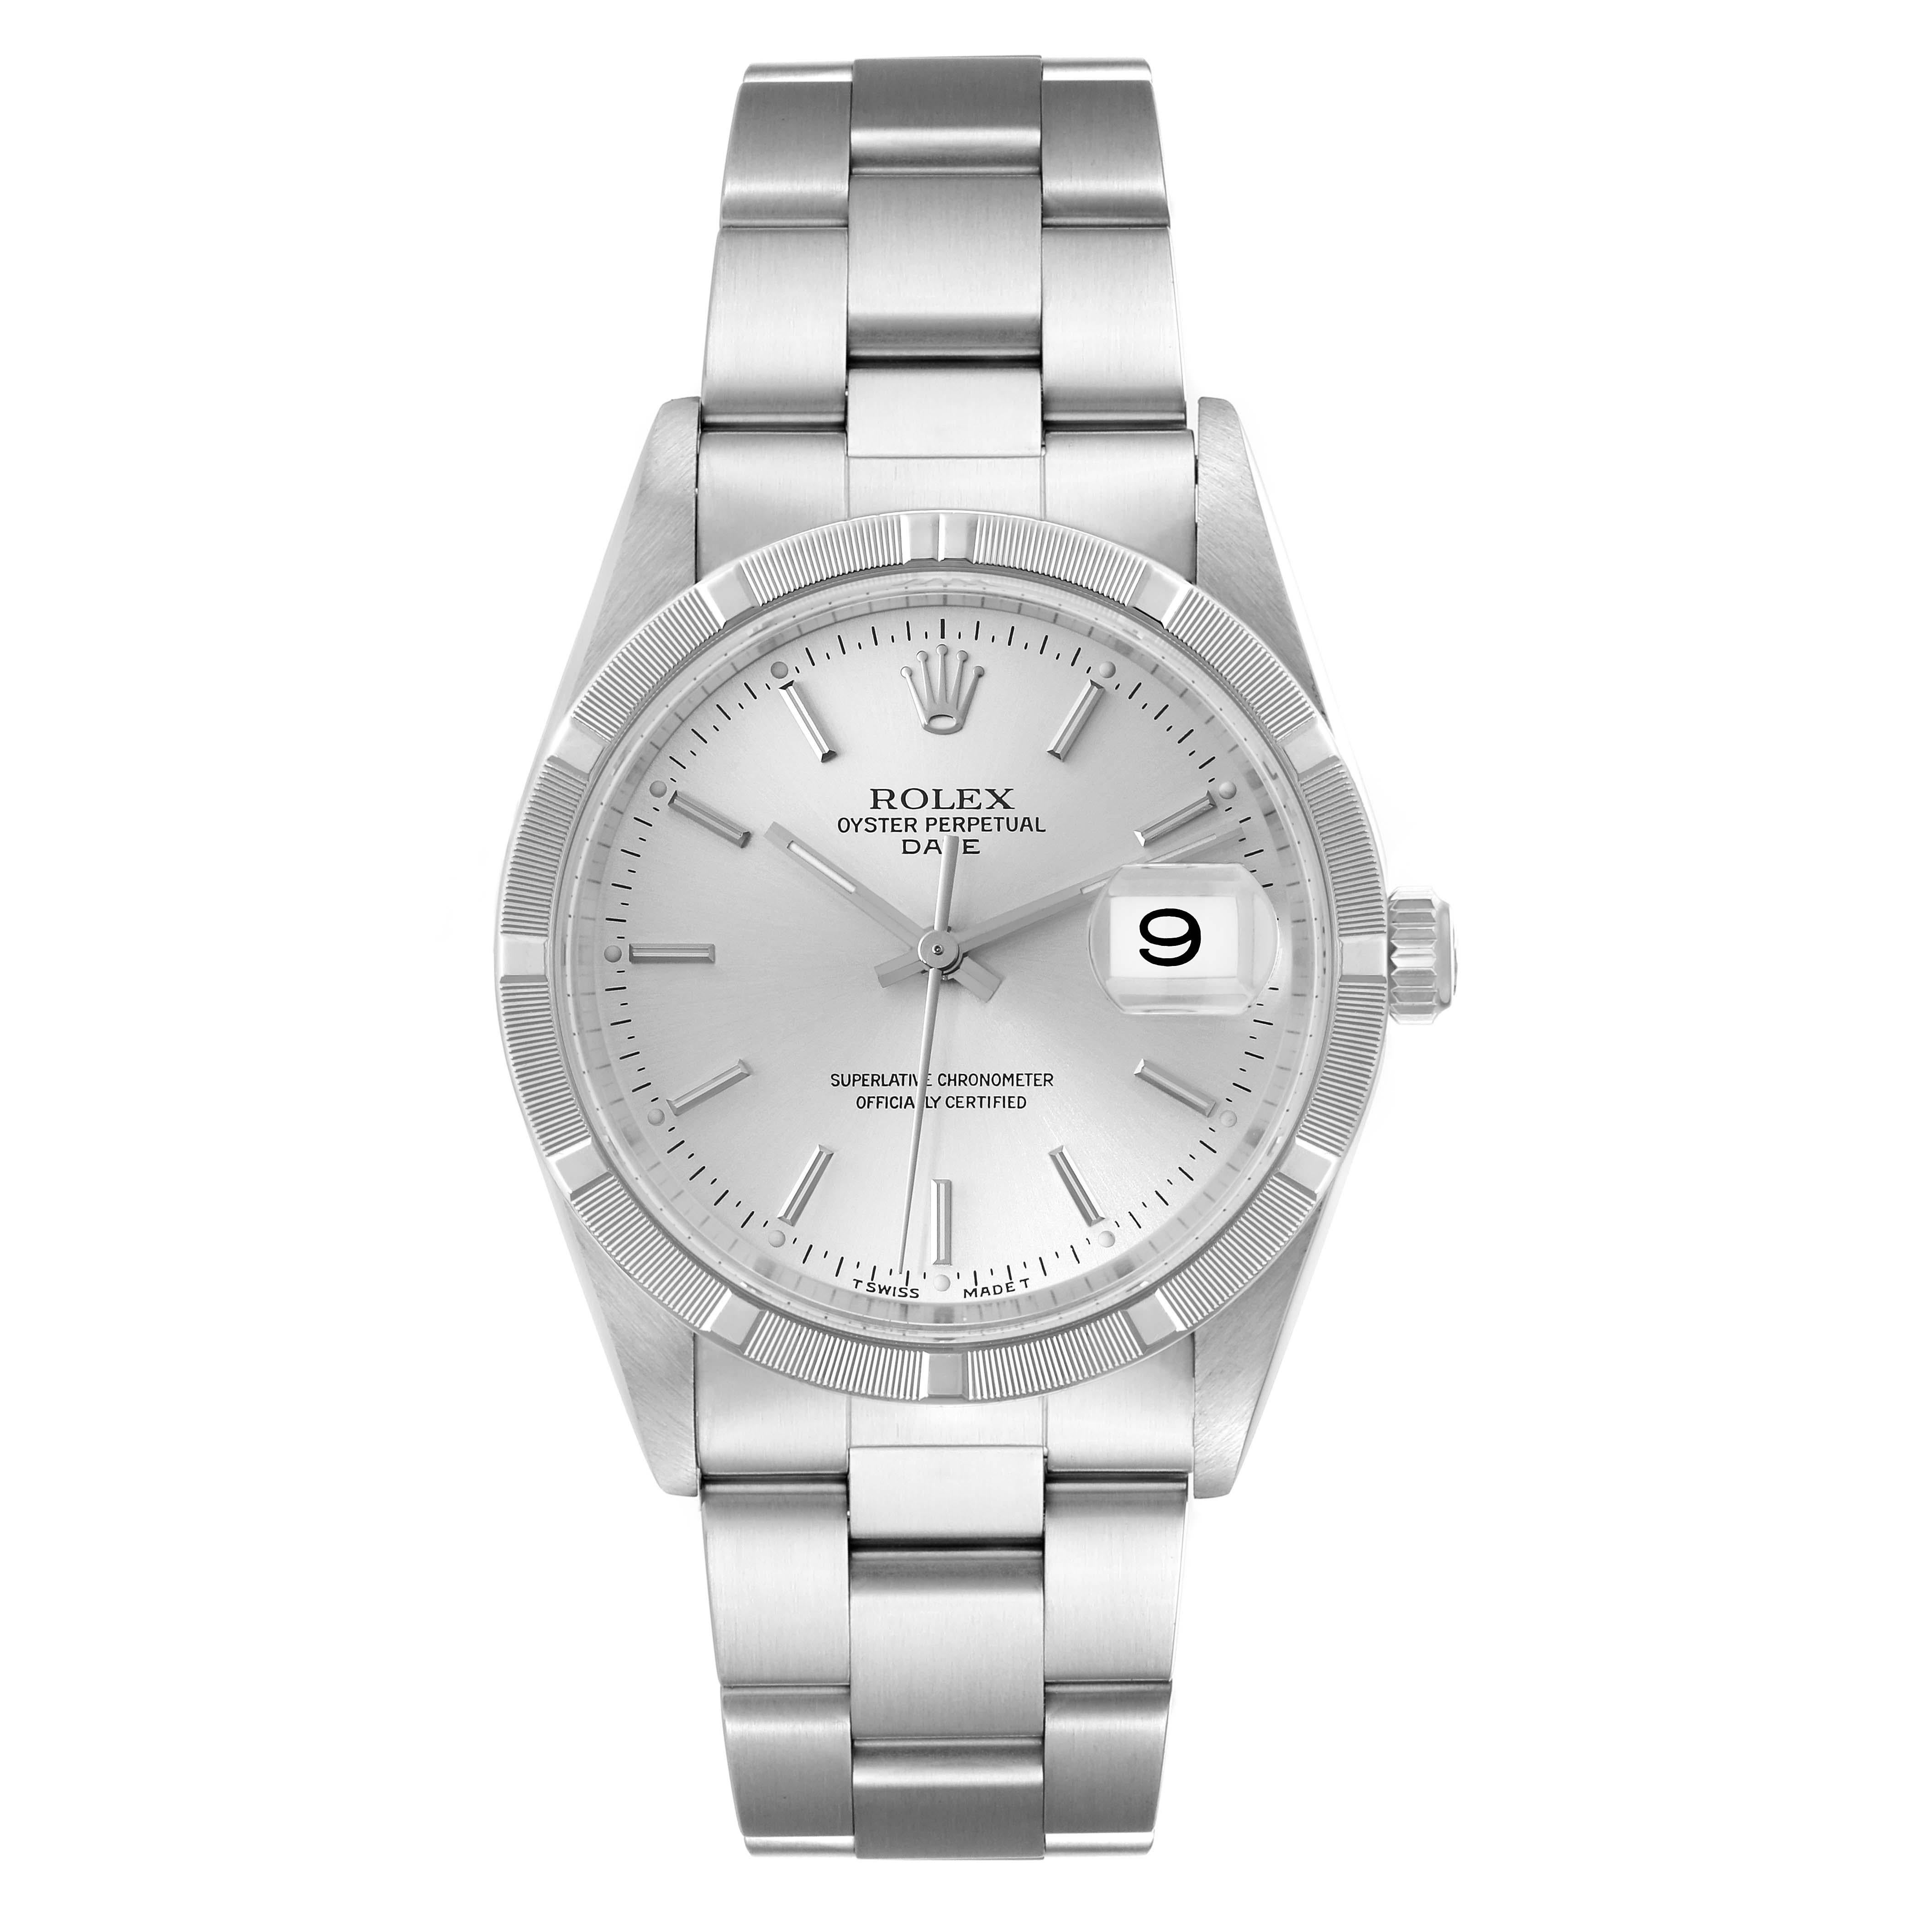 Rolex Date Silver Dial Engine Turned Bezel Steel Mens Watch 15210. Officially certified chronometer automatic self-winding movement with quickset date. Stainless steel case 34.0 mm in diameter. Rolex logo on the crown. Stainless steel engine turned